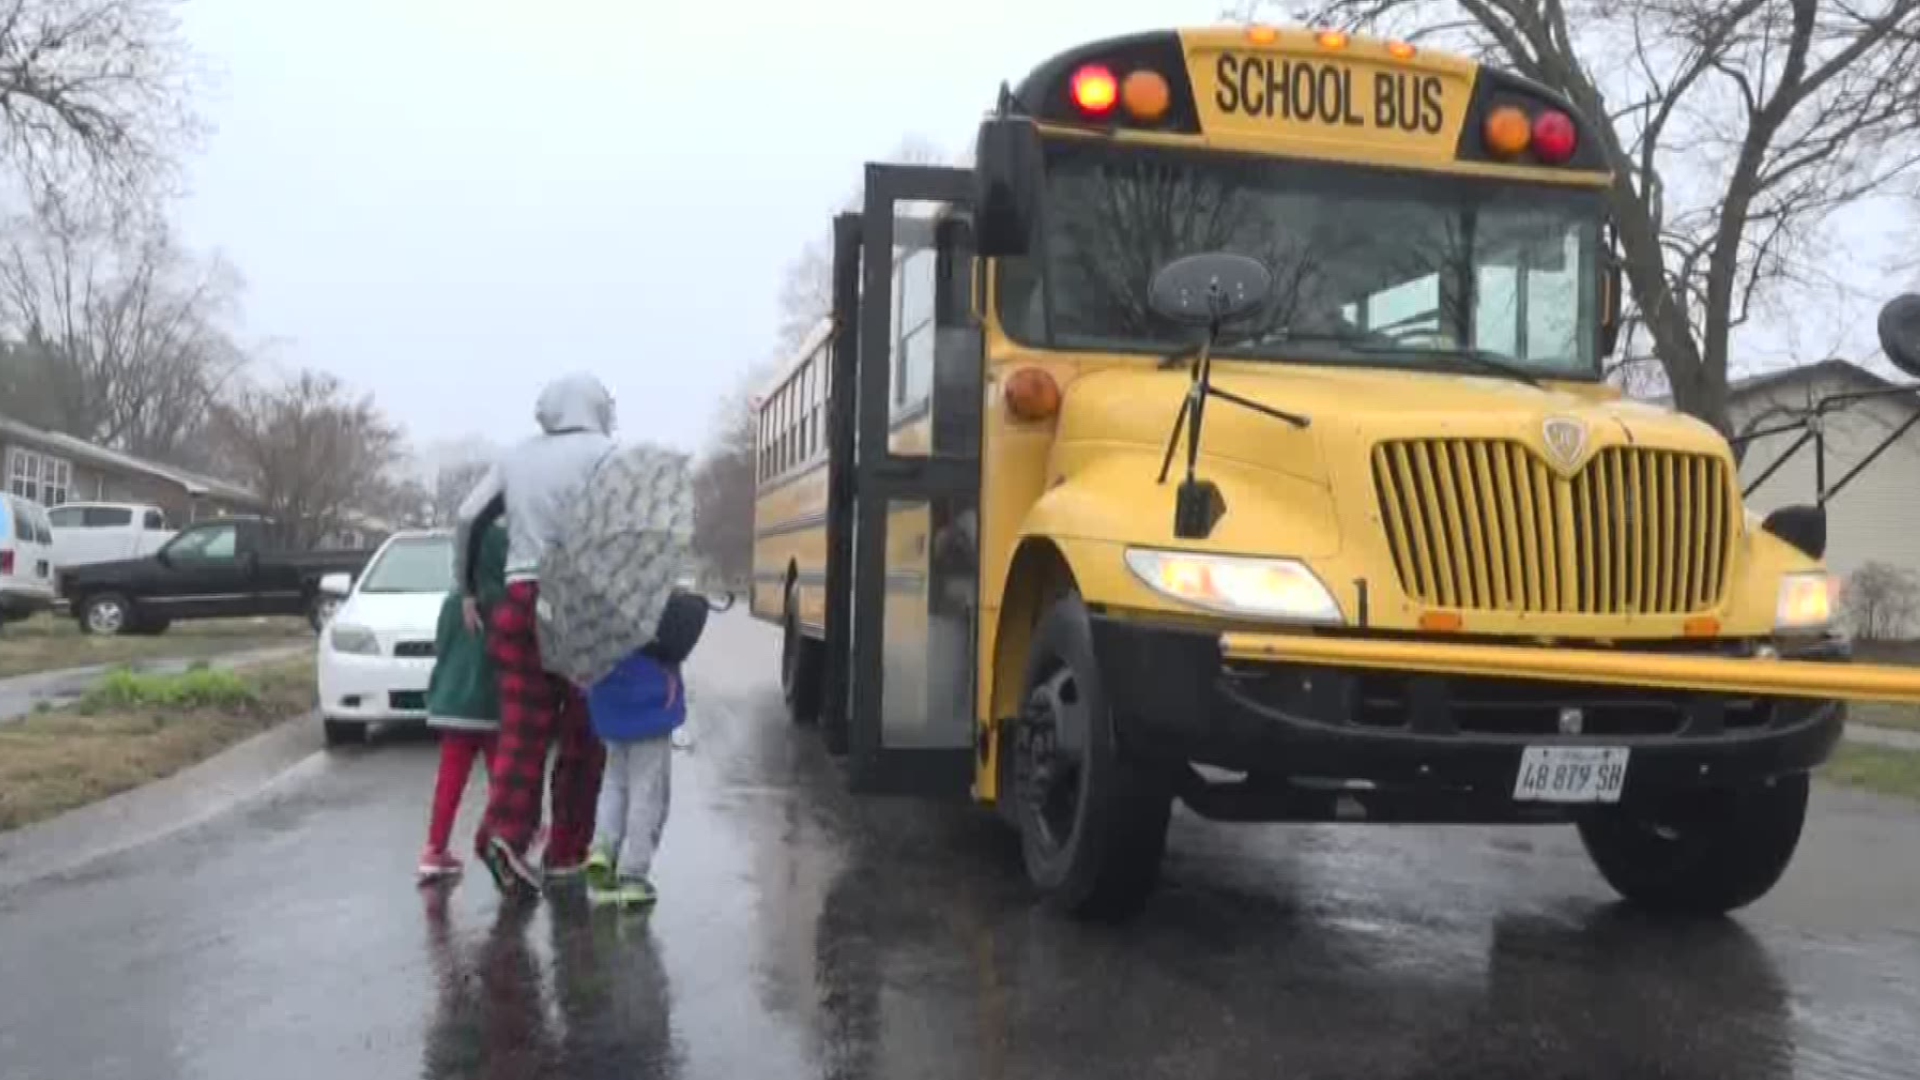 We visited a school district in the Metro East to see how it's addressing the challenges of reaching students across several towns and several miles.